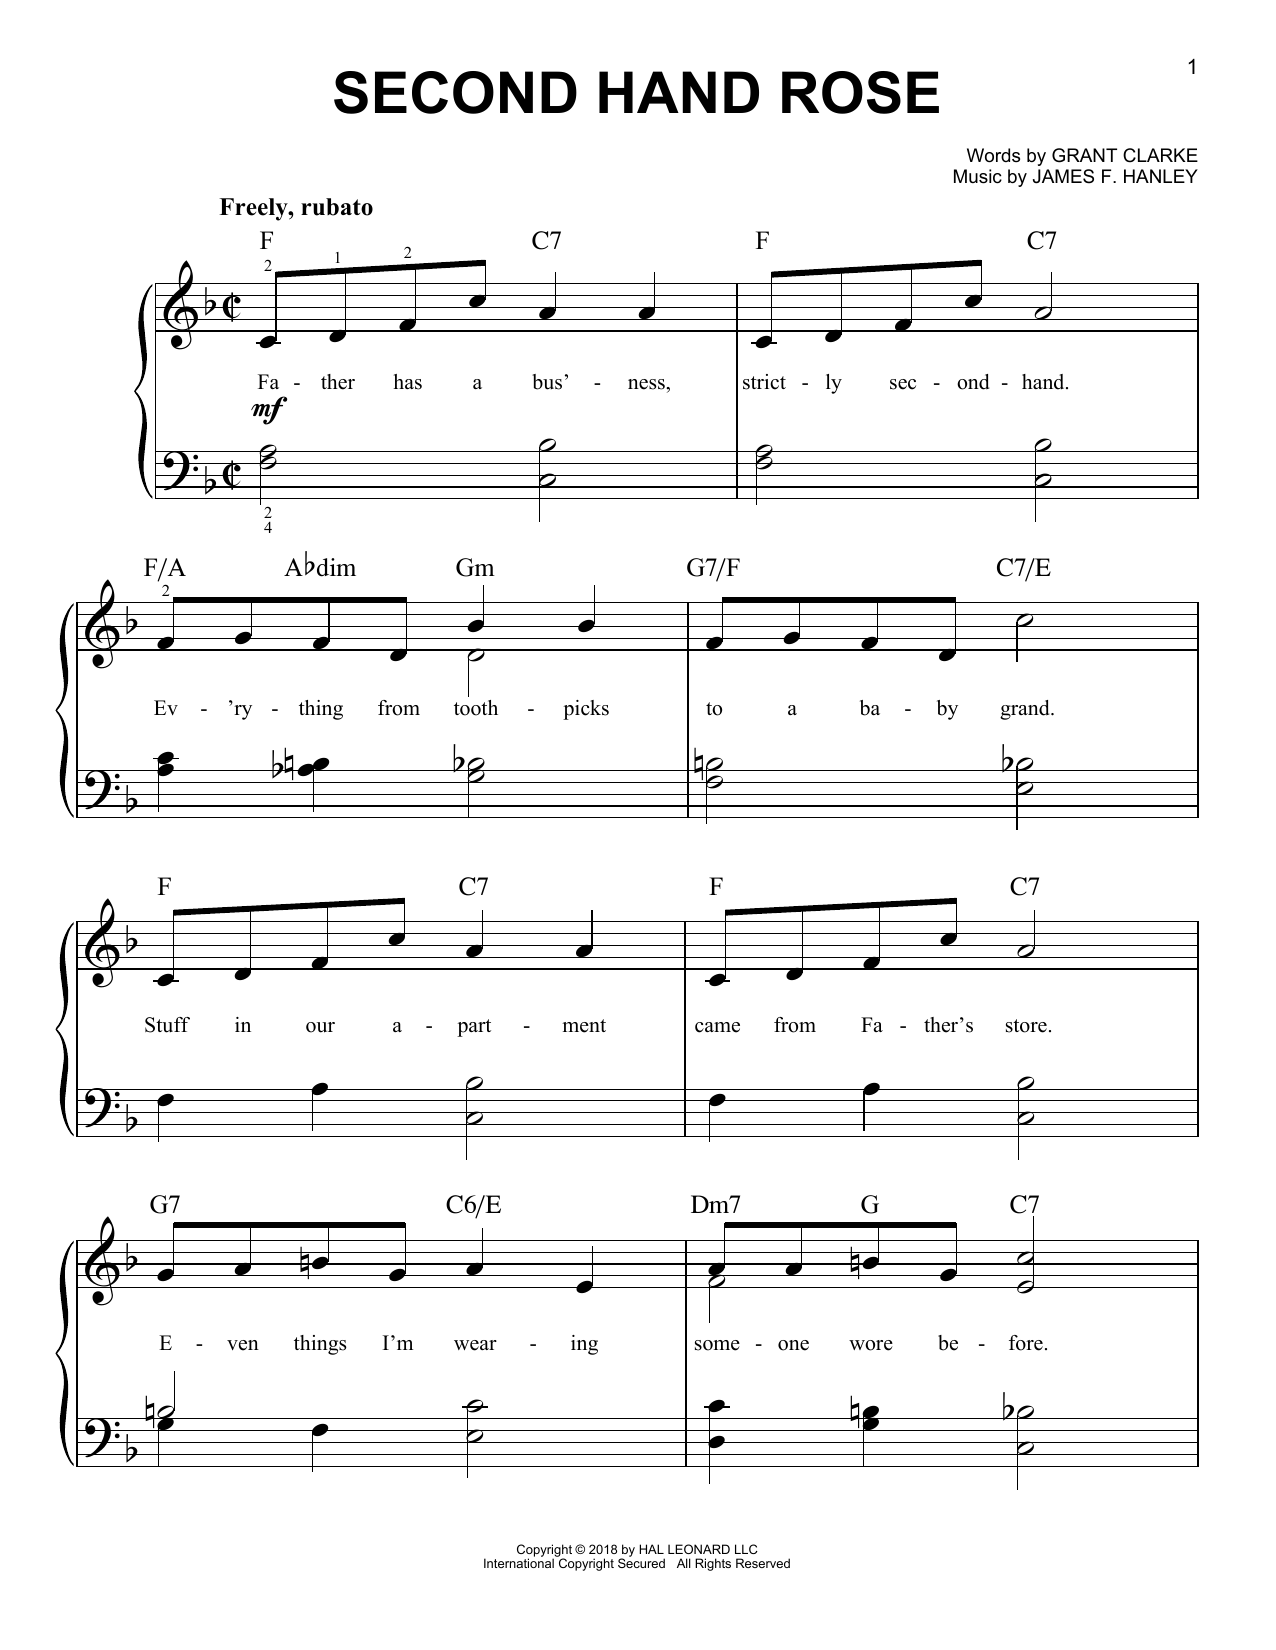 Download Grant Clarke Second Hand Rose Sheet Music